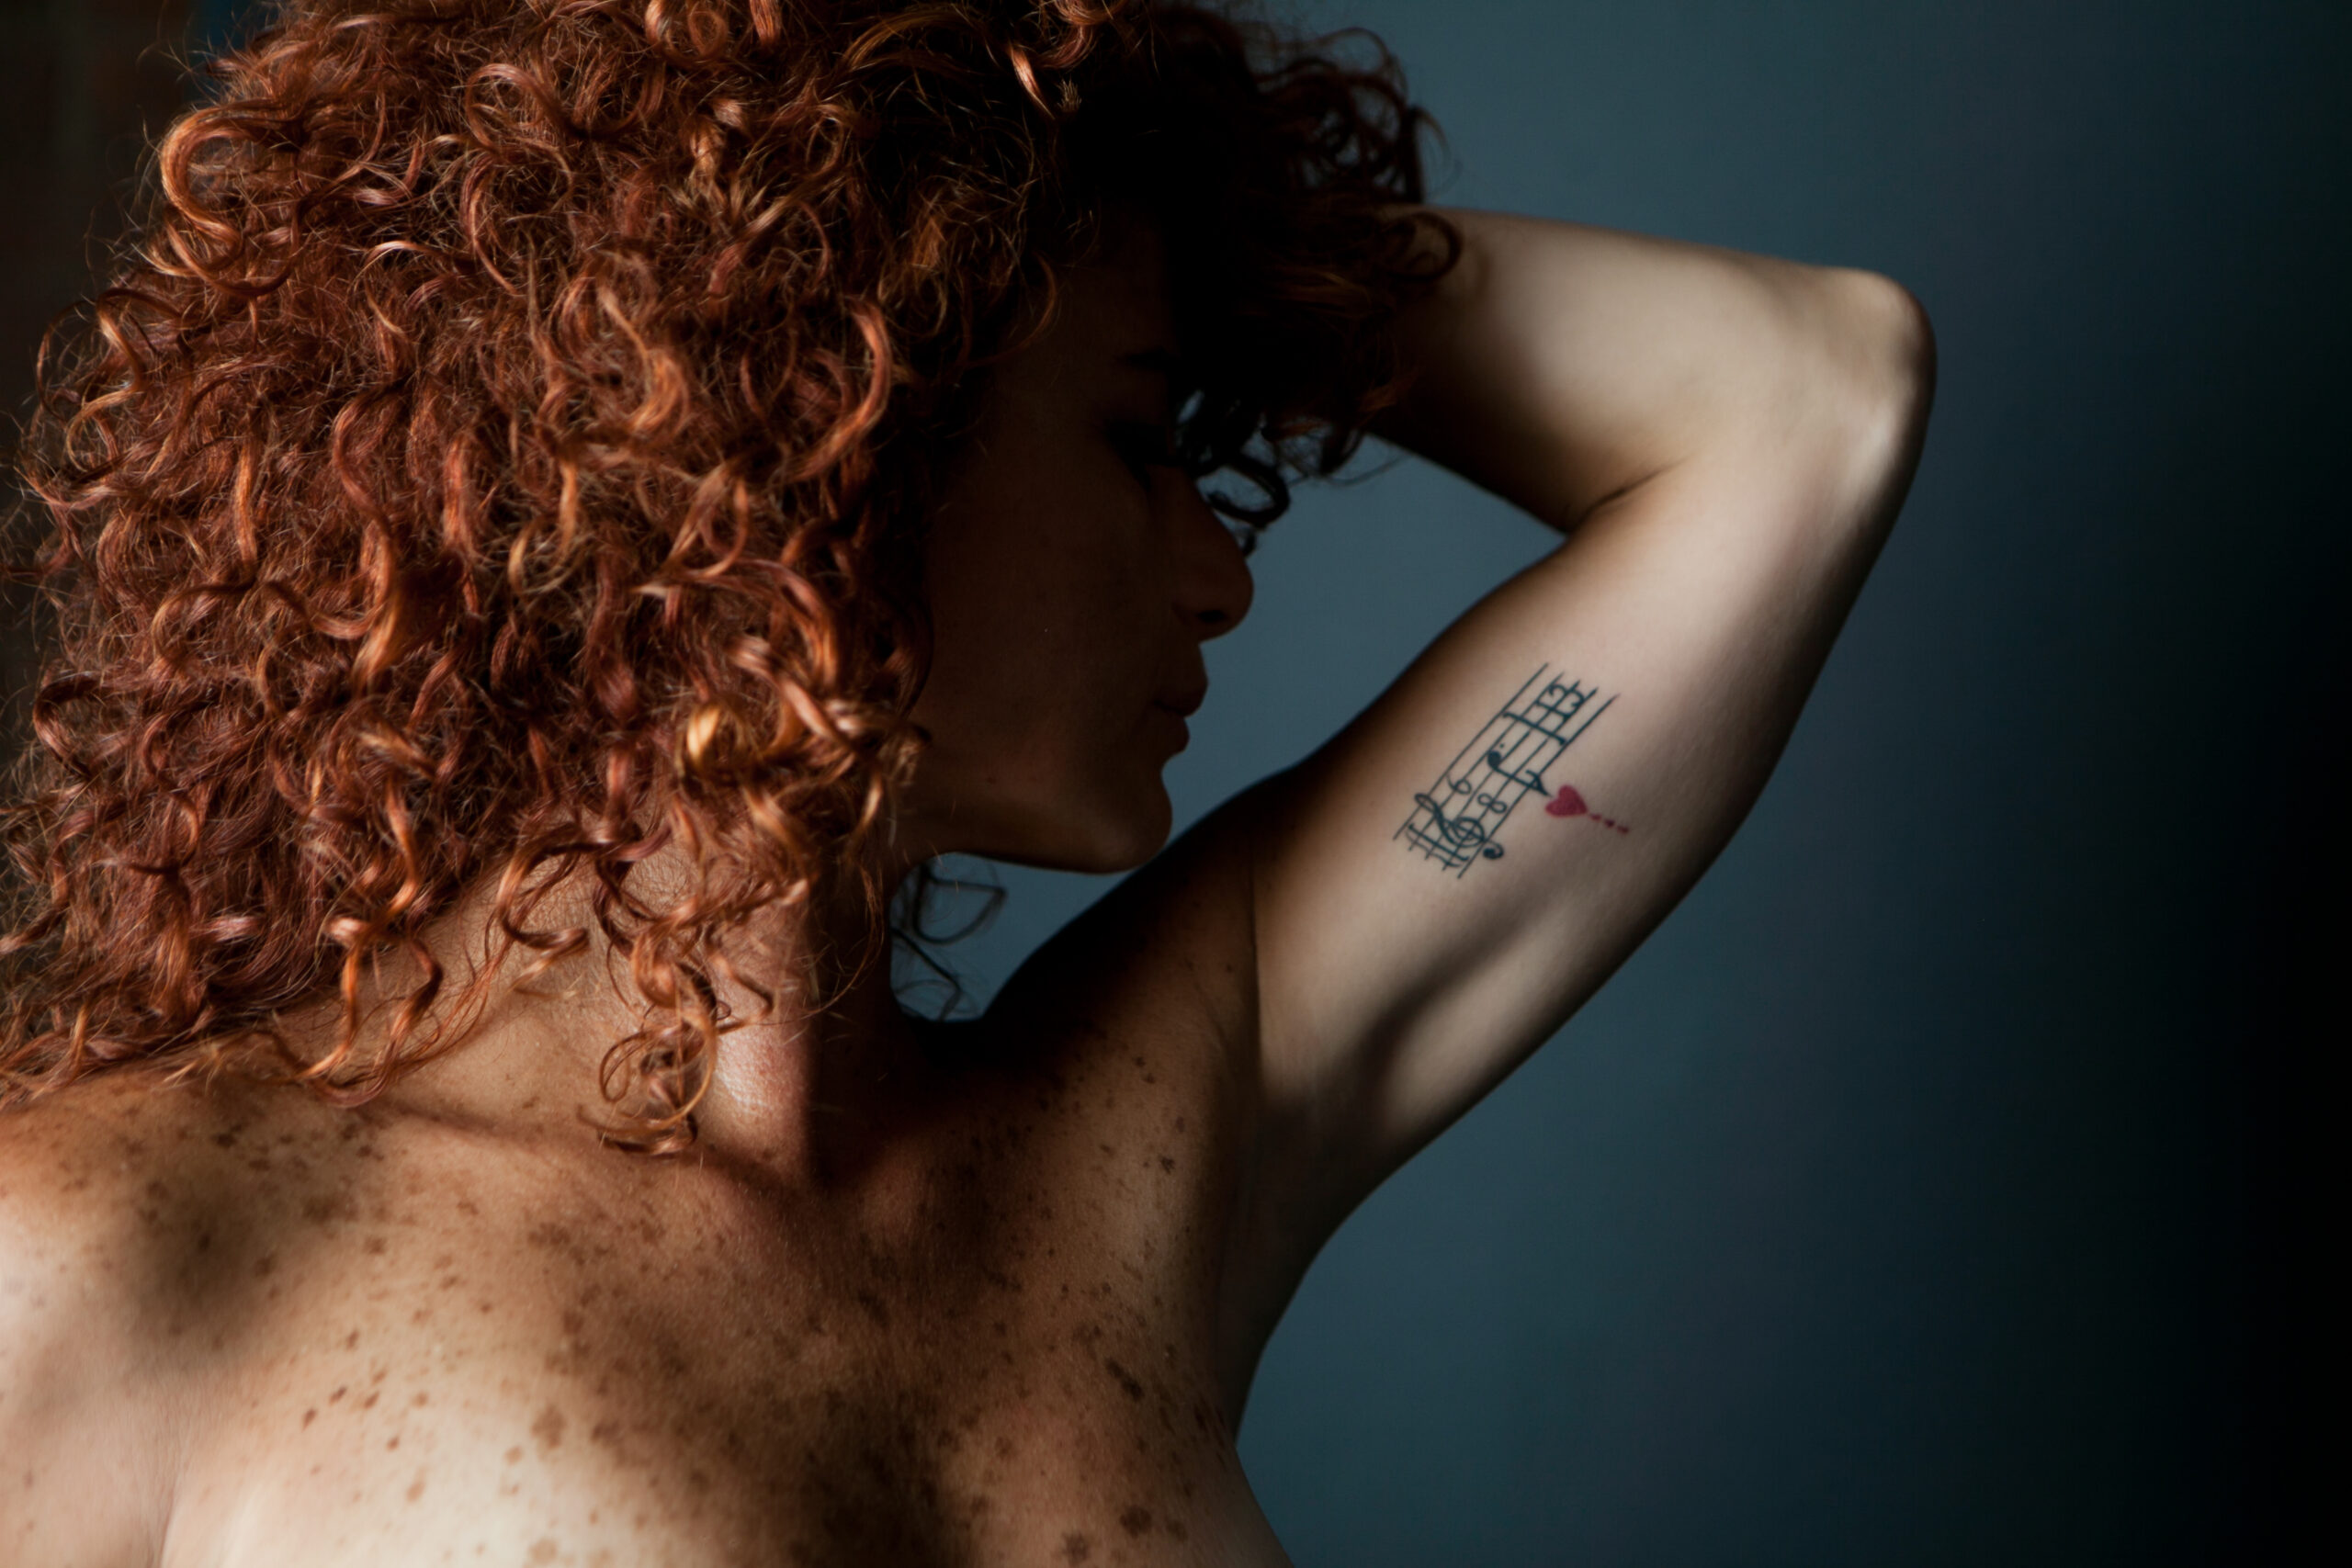 Image of a woman with red hair and tattoo